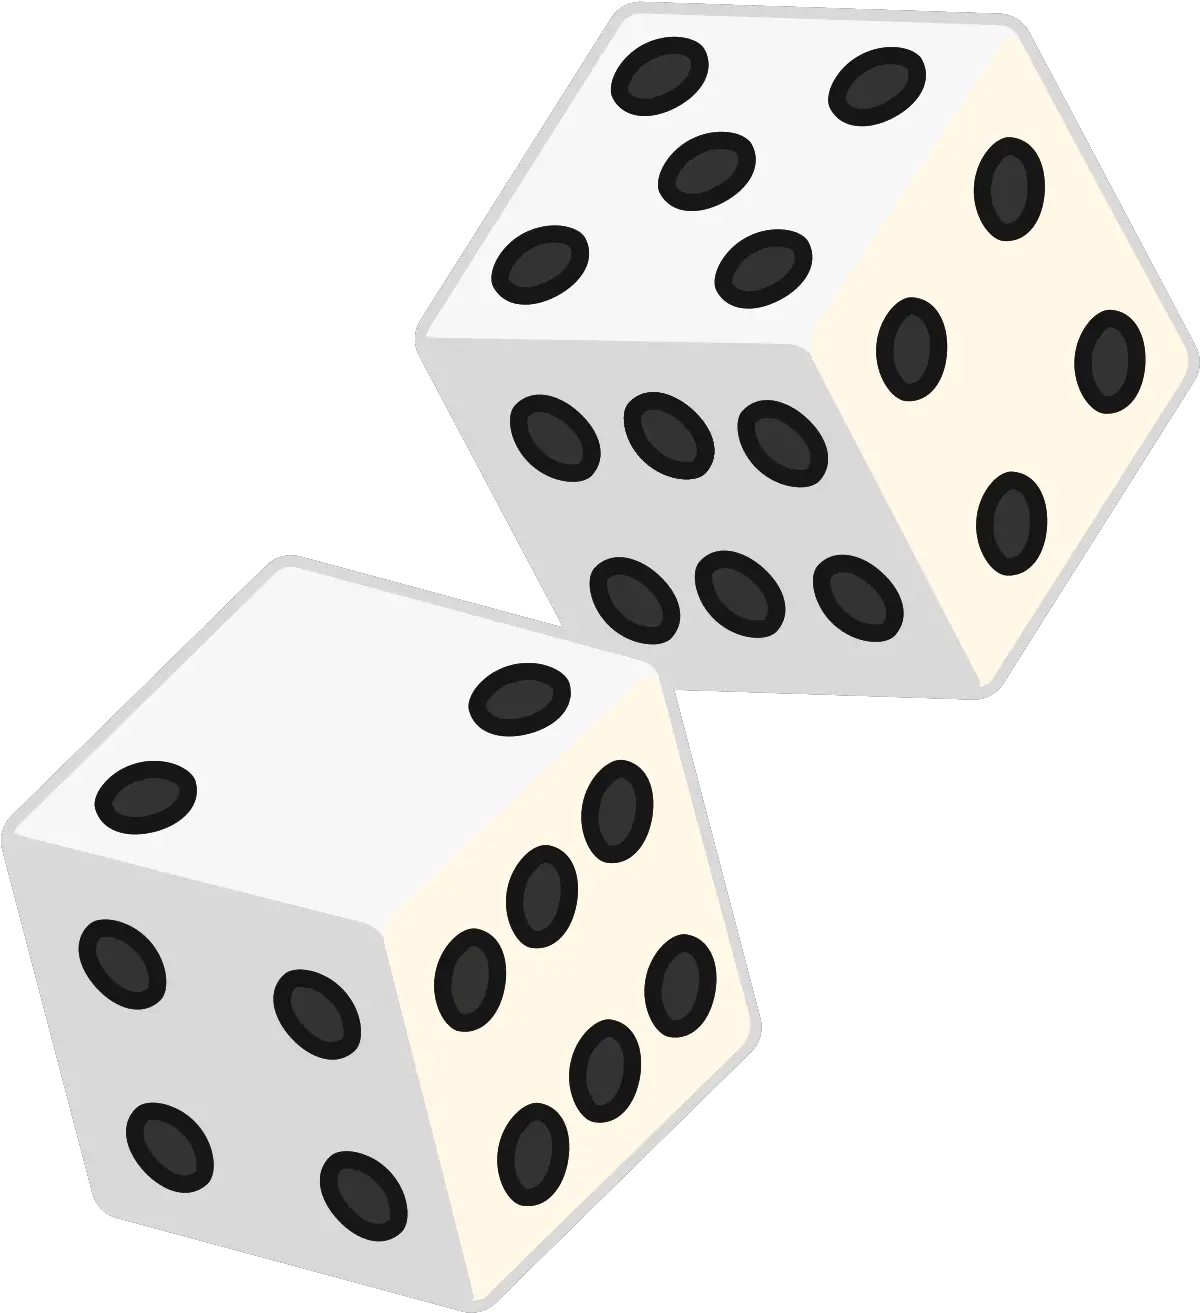 Download Two Dice Transparent Png Image Two Dice Transparent Background Dice Transparent Background